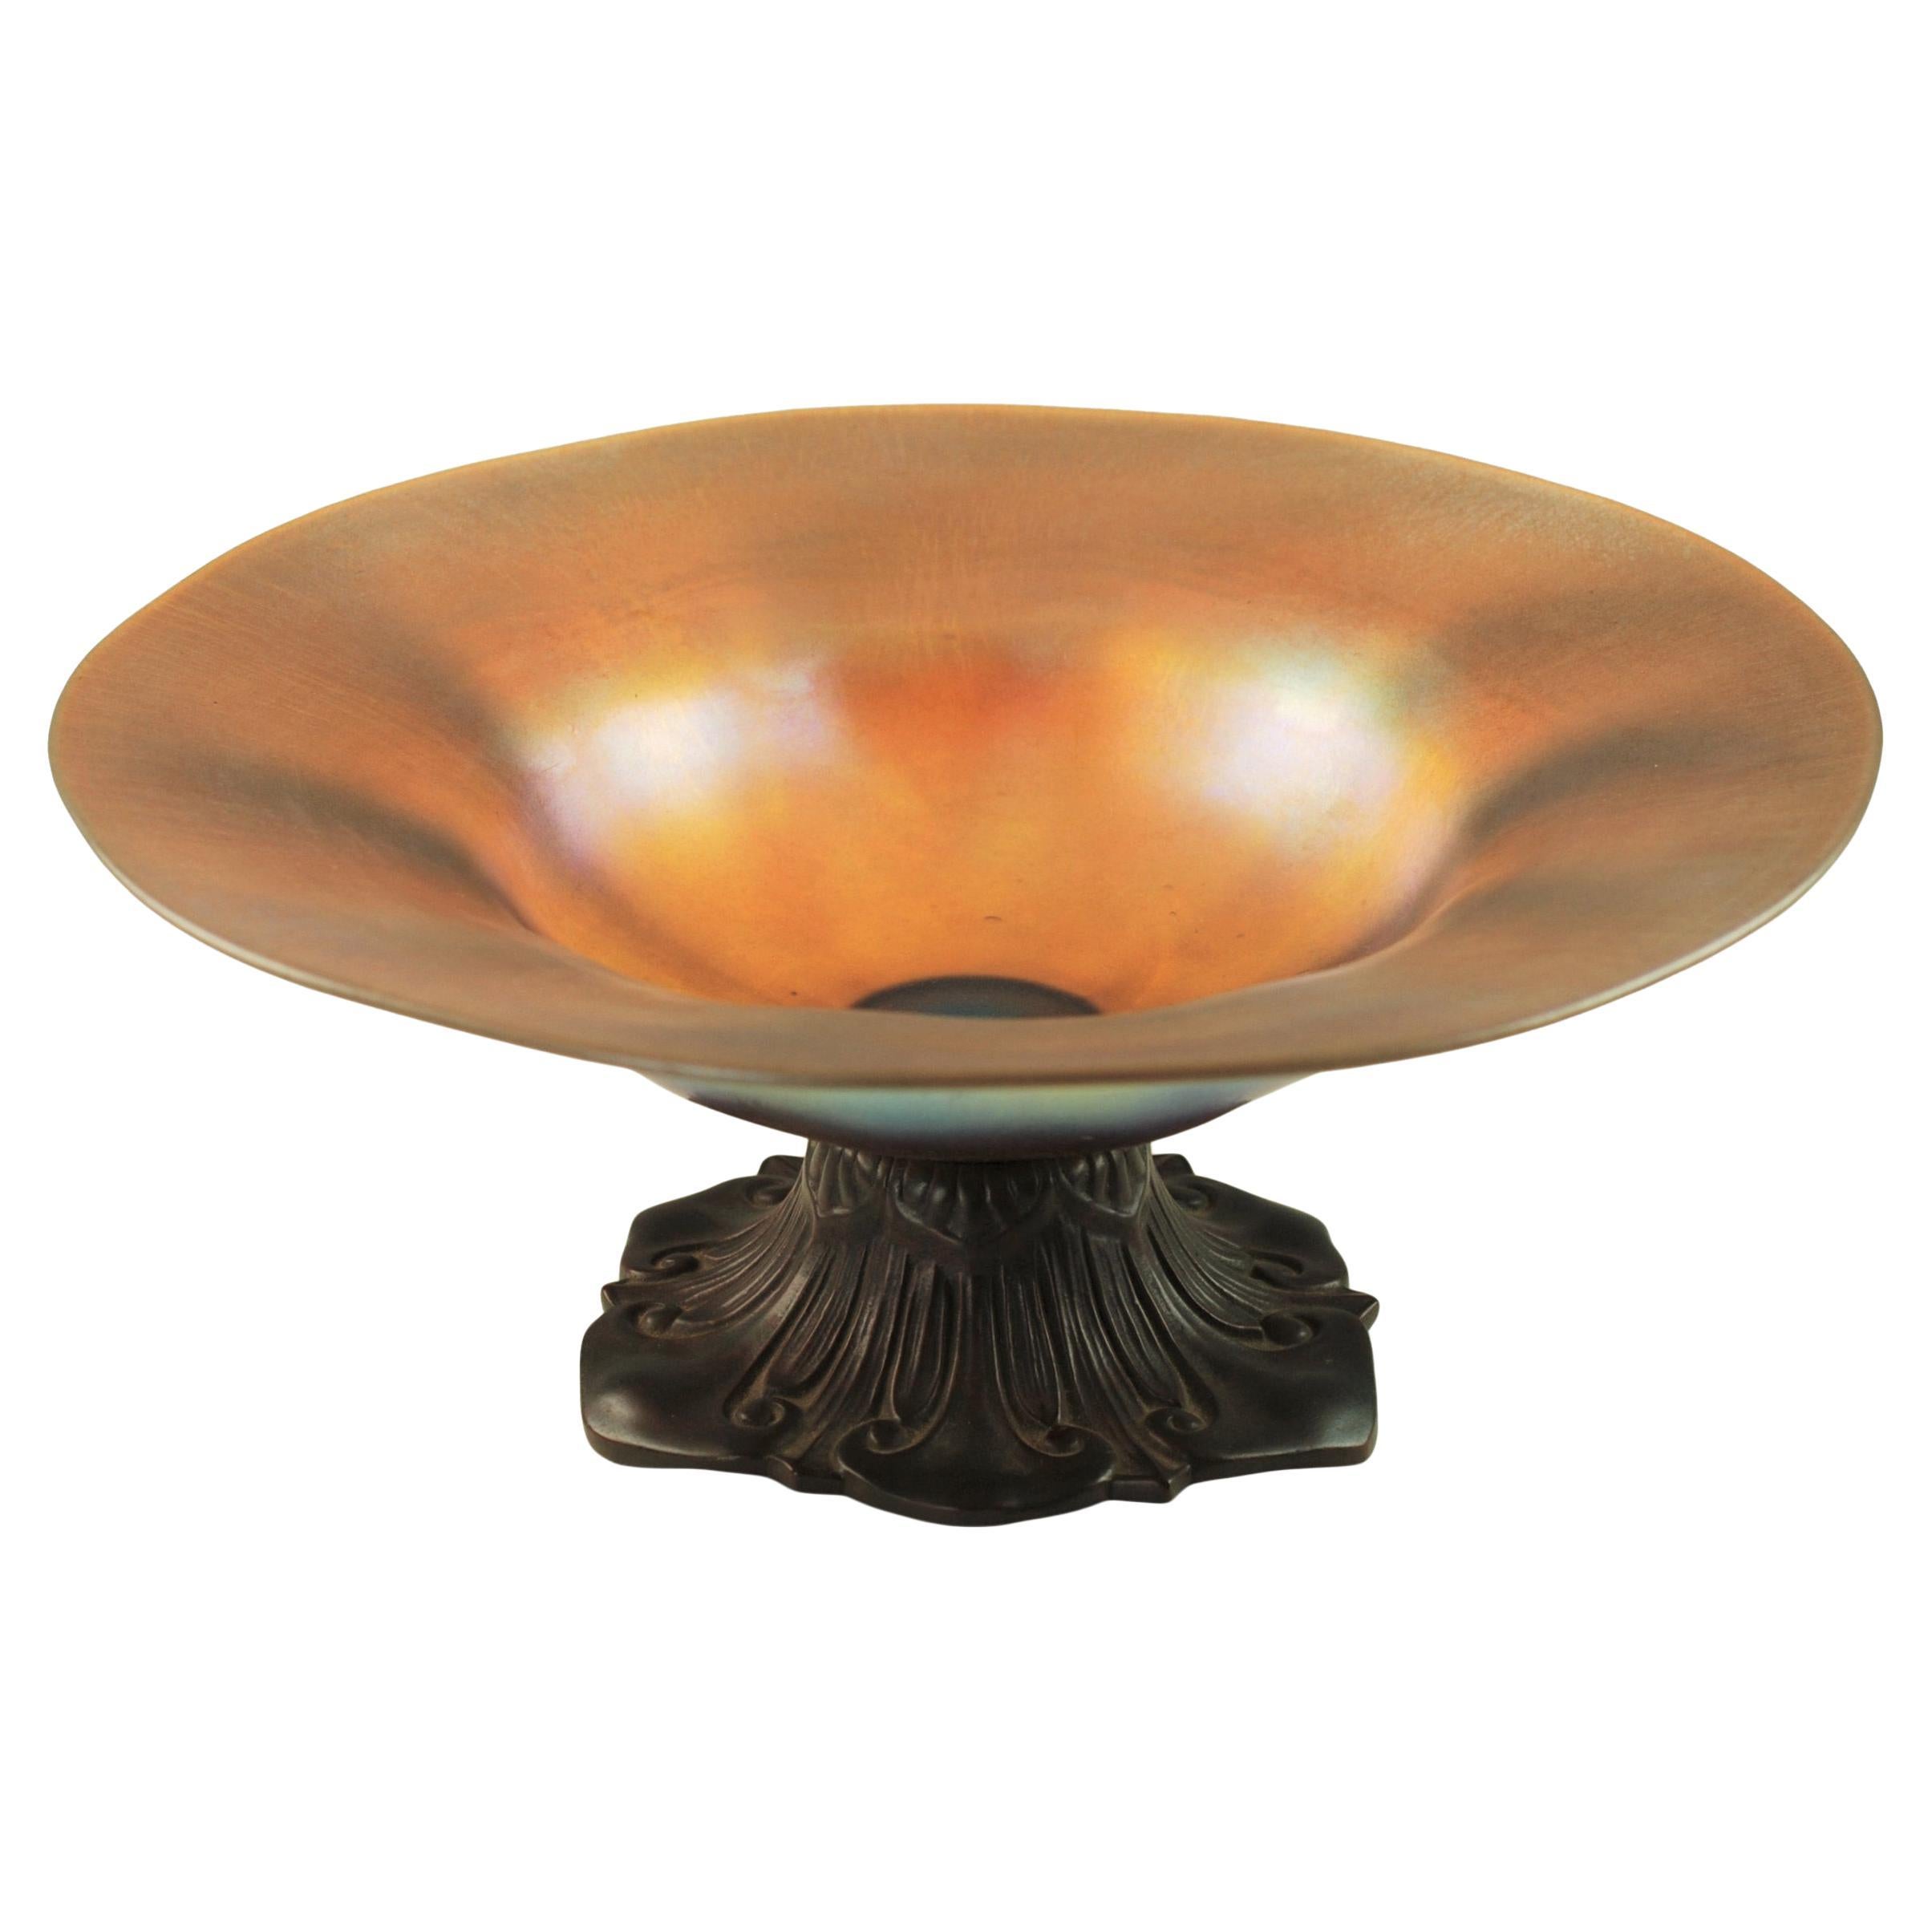 Early 20th Century Tiffany Favrile Art Glass Console Bowl with Bronze Base